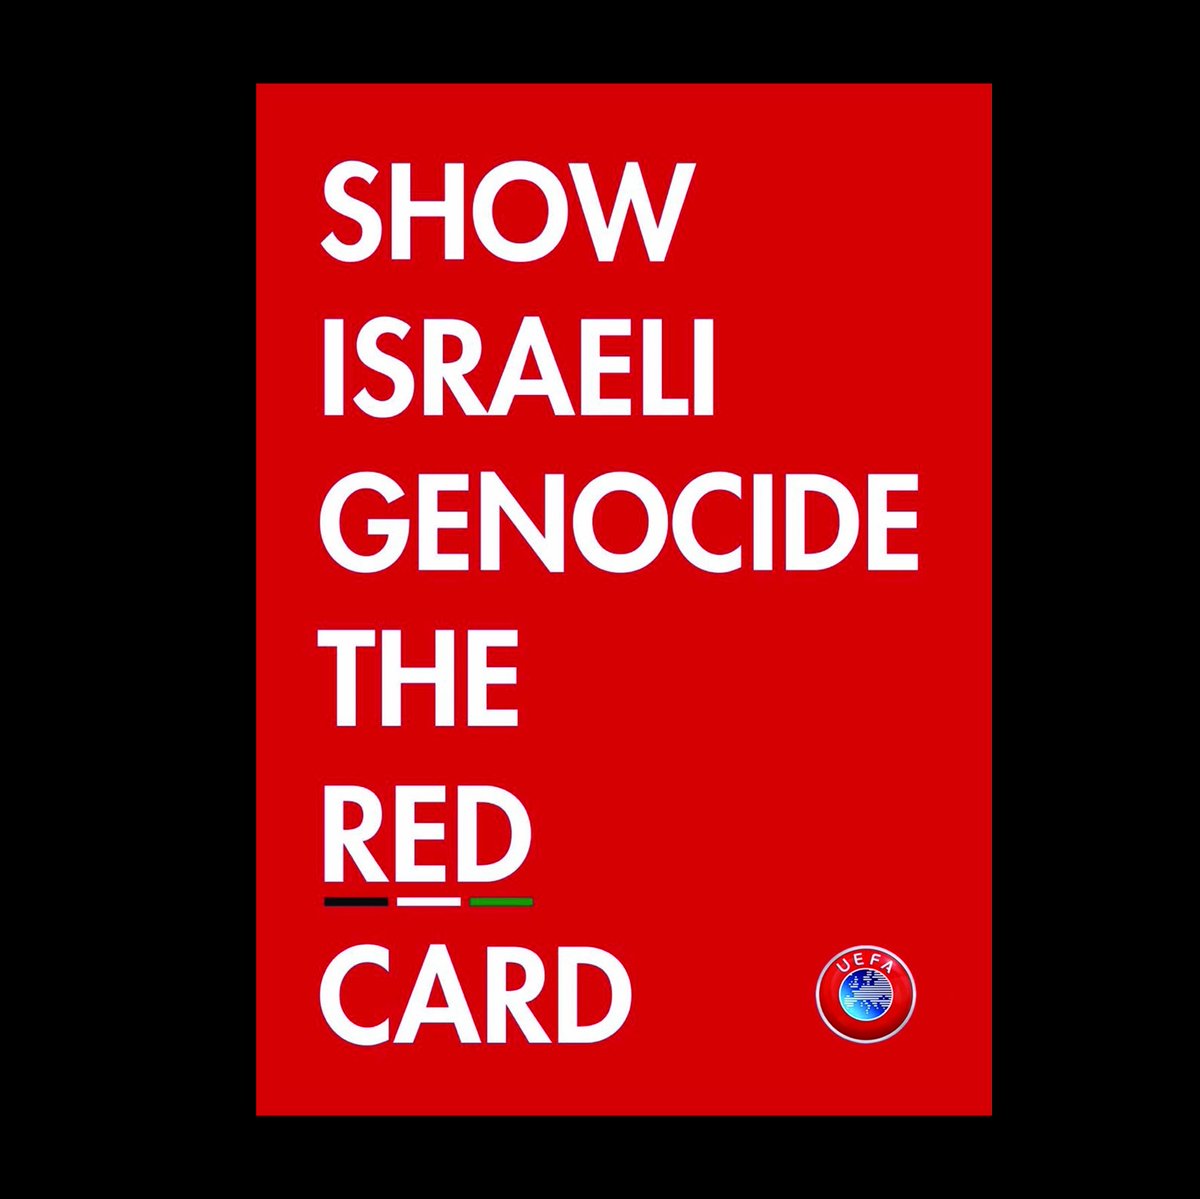 It's time for @FIFAcom to #RedCardIsrael for serious foul play and violent conduct ggec.org.uk/show-israeli-g…